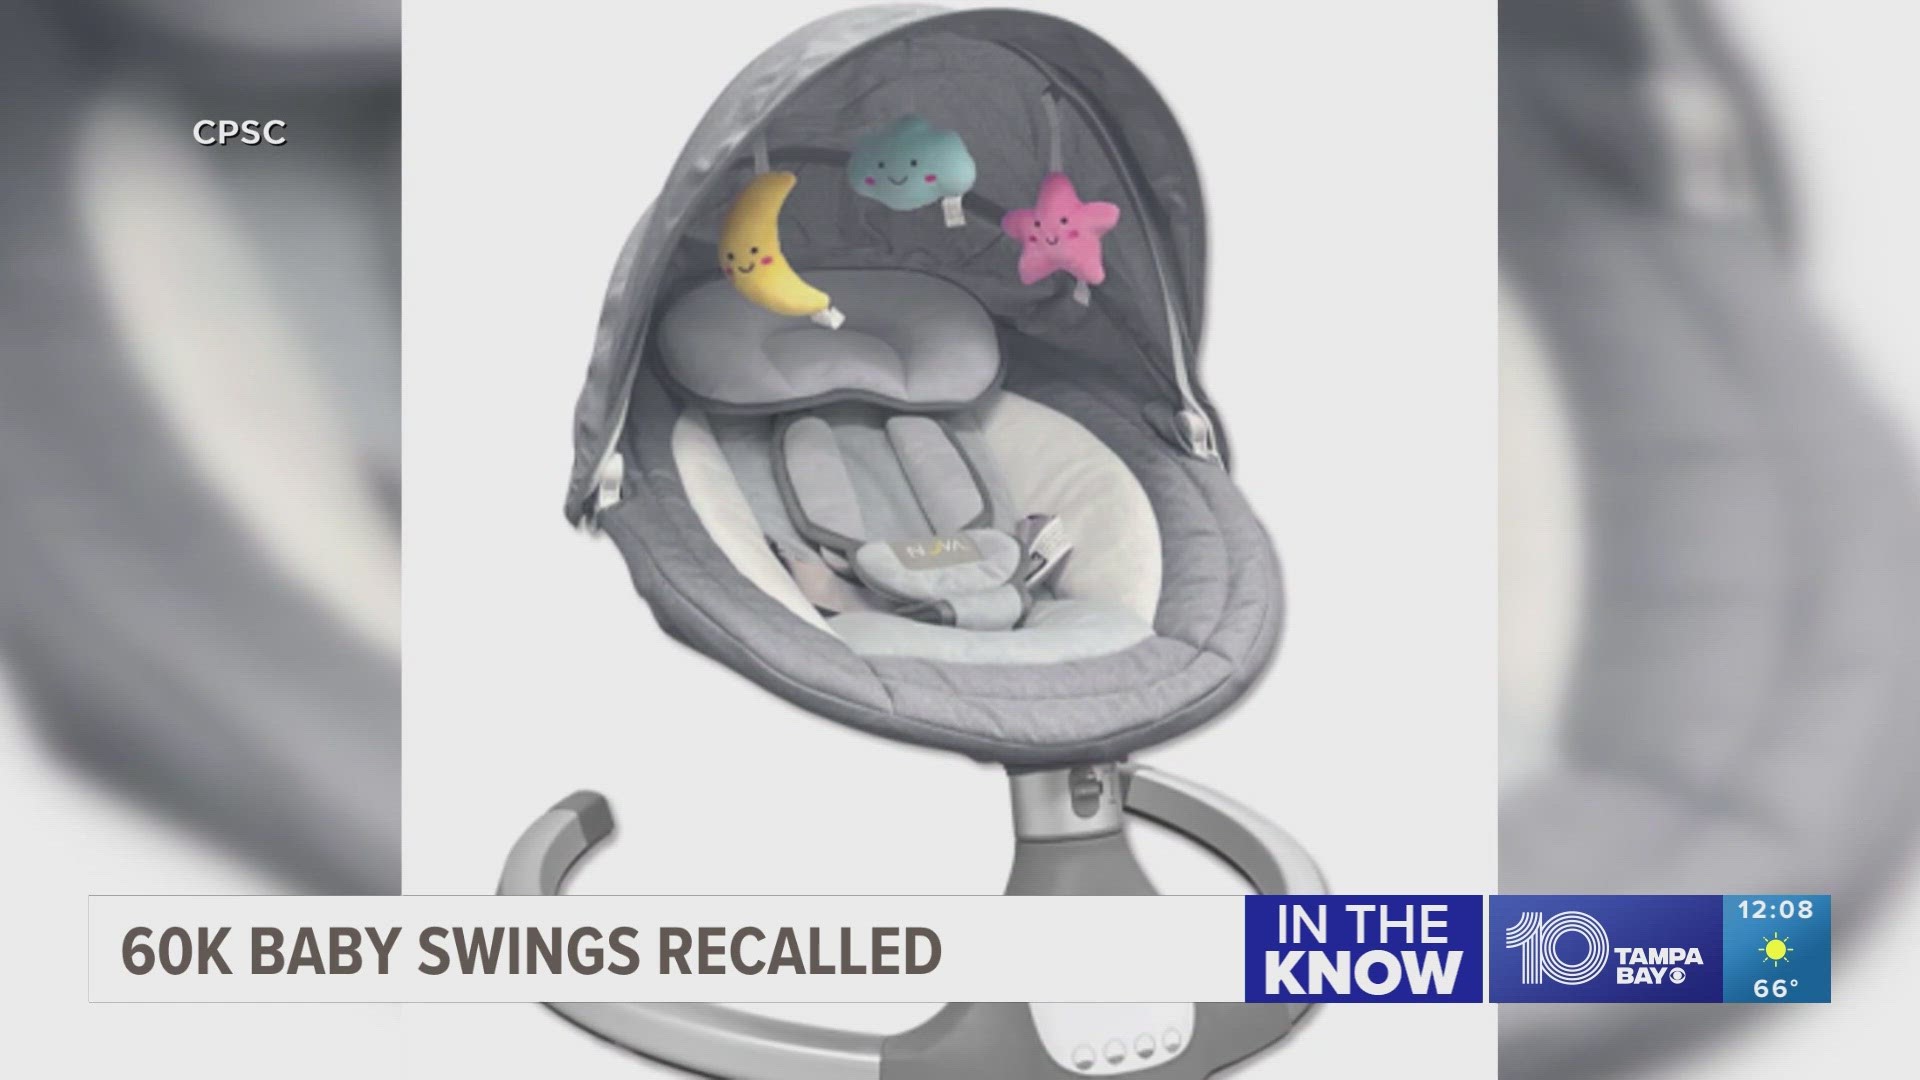 The swings were sold at Walmart stores and online. You can contact Jool Baby for a free repair kit.